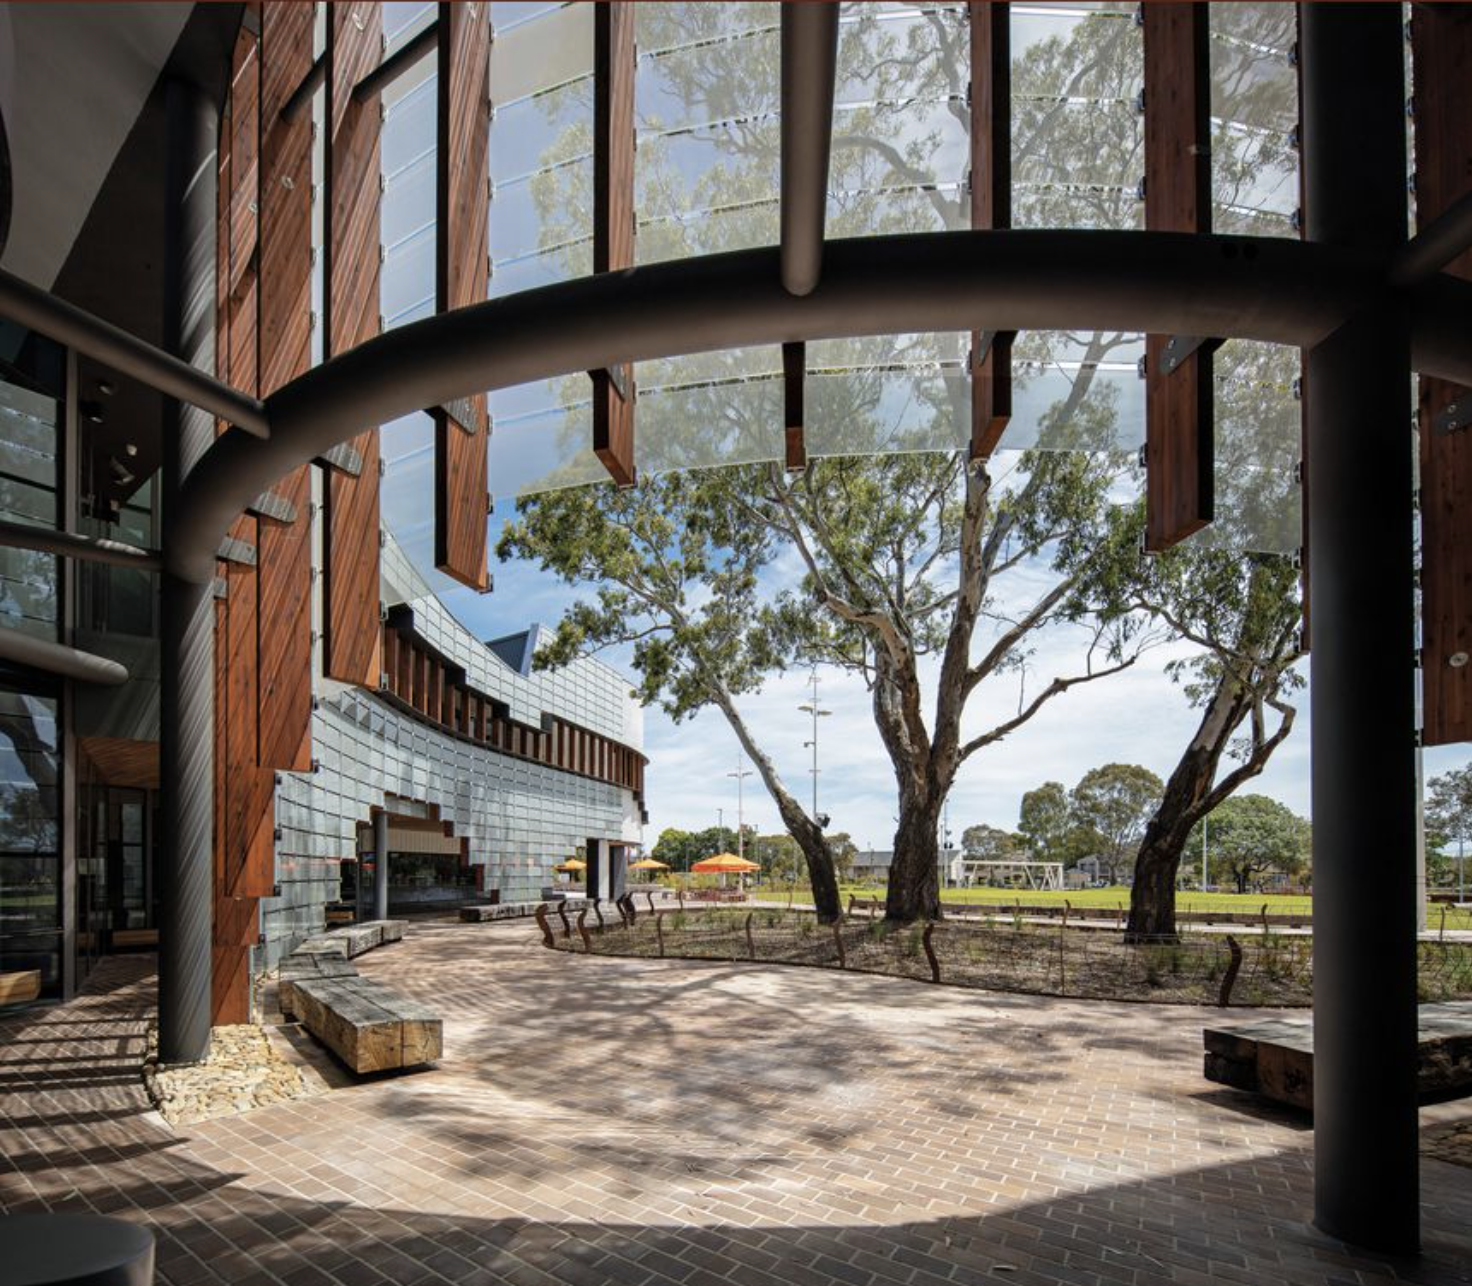 SPRINGVALE LIBRARY AND COMMUNITY HUB